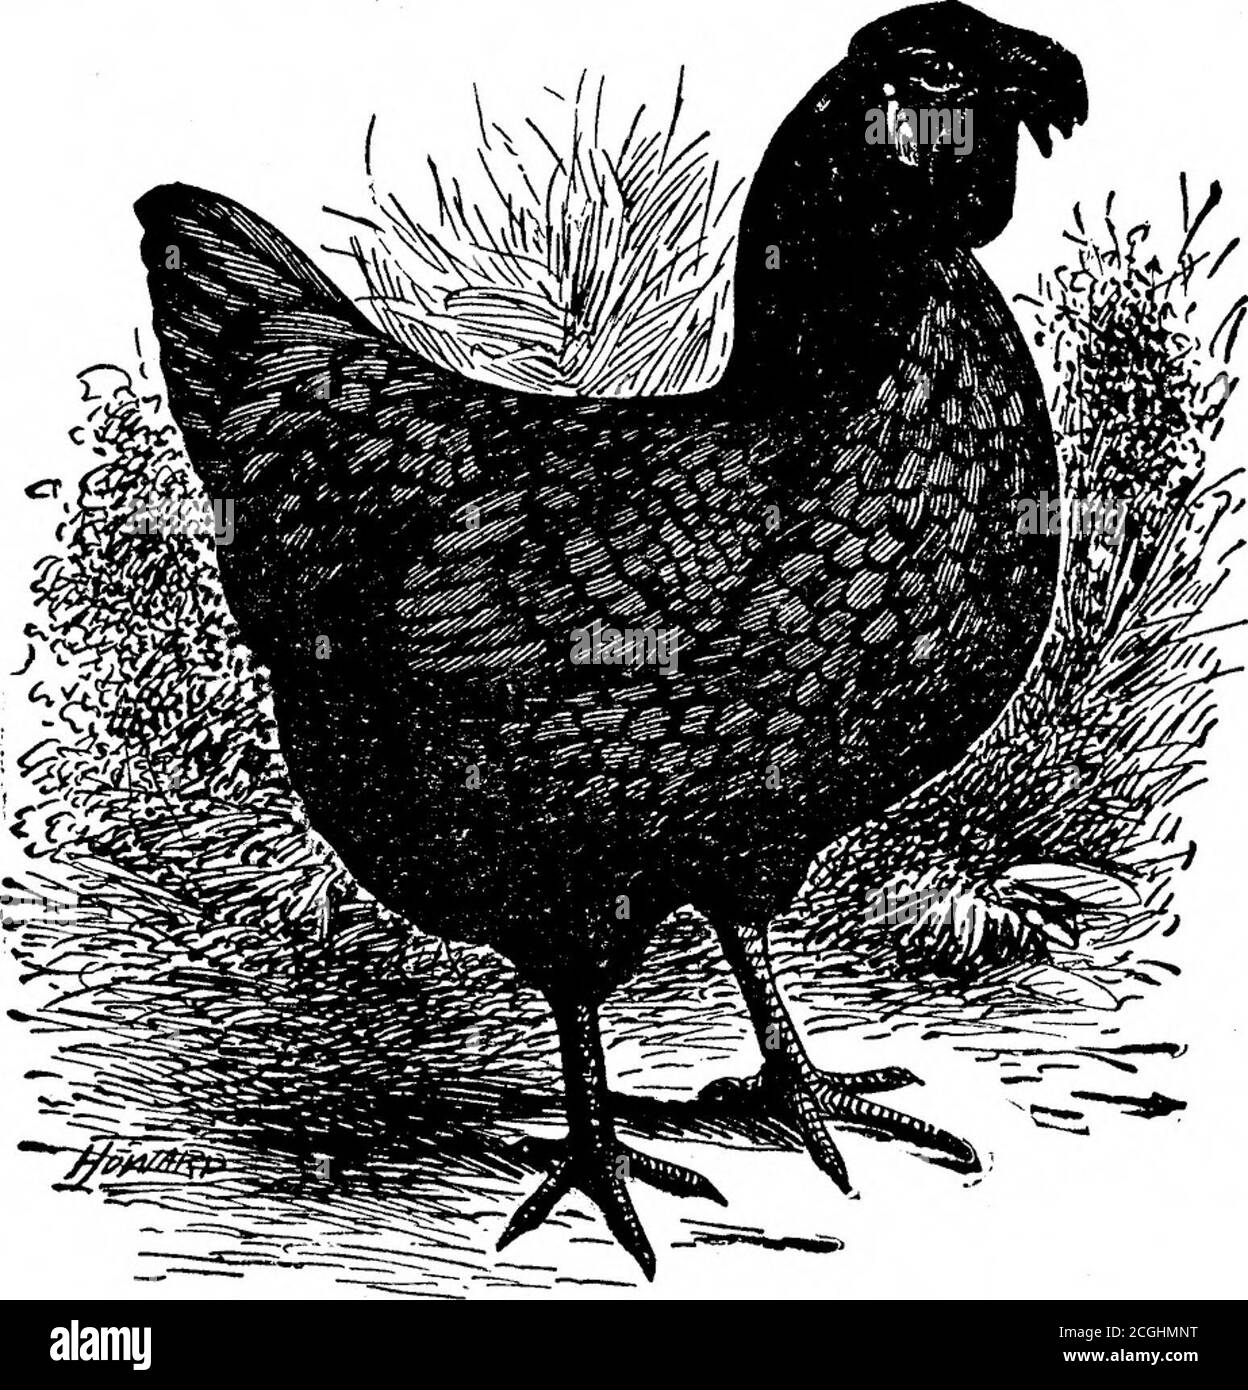 . Standard varieties of chickens . laying. Their eggs are large and white and ofgood flavor. The white face is a distinguishing feature and shouldbe long, smooth, free from wrinkles, rising well over the eyes in anarched form, extending toward the back of the head and to the baseof the beak, covering the cheeks and joining the wattles and earlobes; the greater the extent of surface the better. It should be purewhite in color. The color of plumage throughout is rich greenish 51 24 black, and any gray is considered a serious defect. The shanks andtoes are blue or dark leaden blue. The comb is si Stock Photo